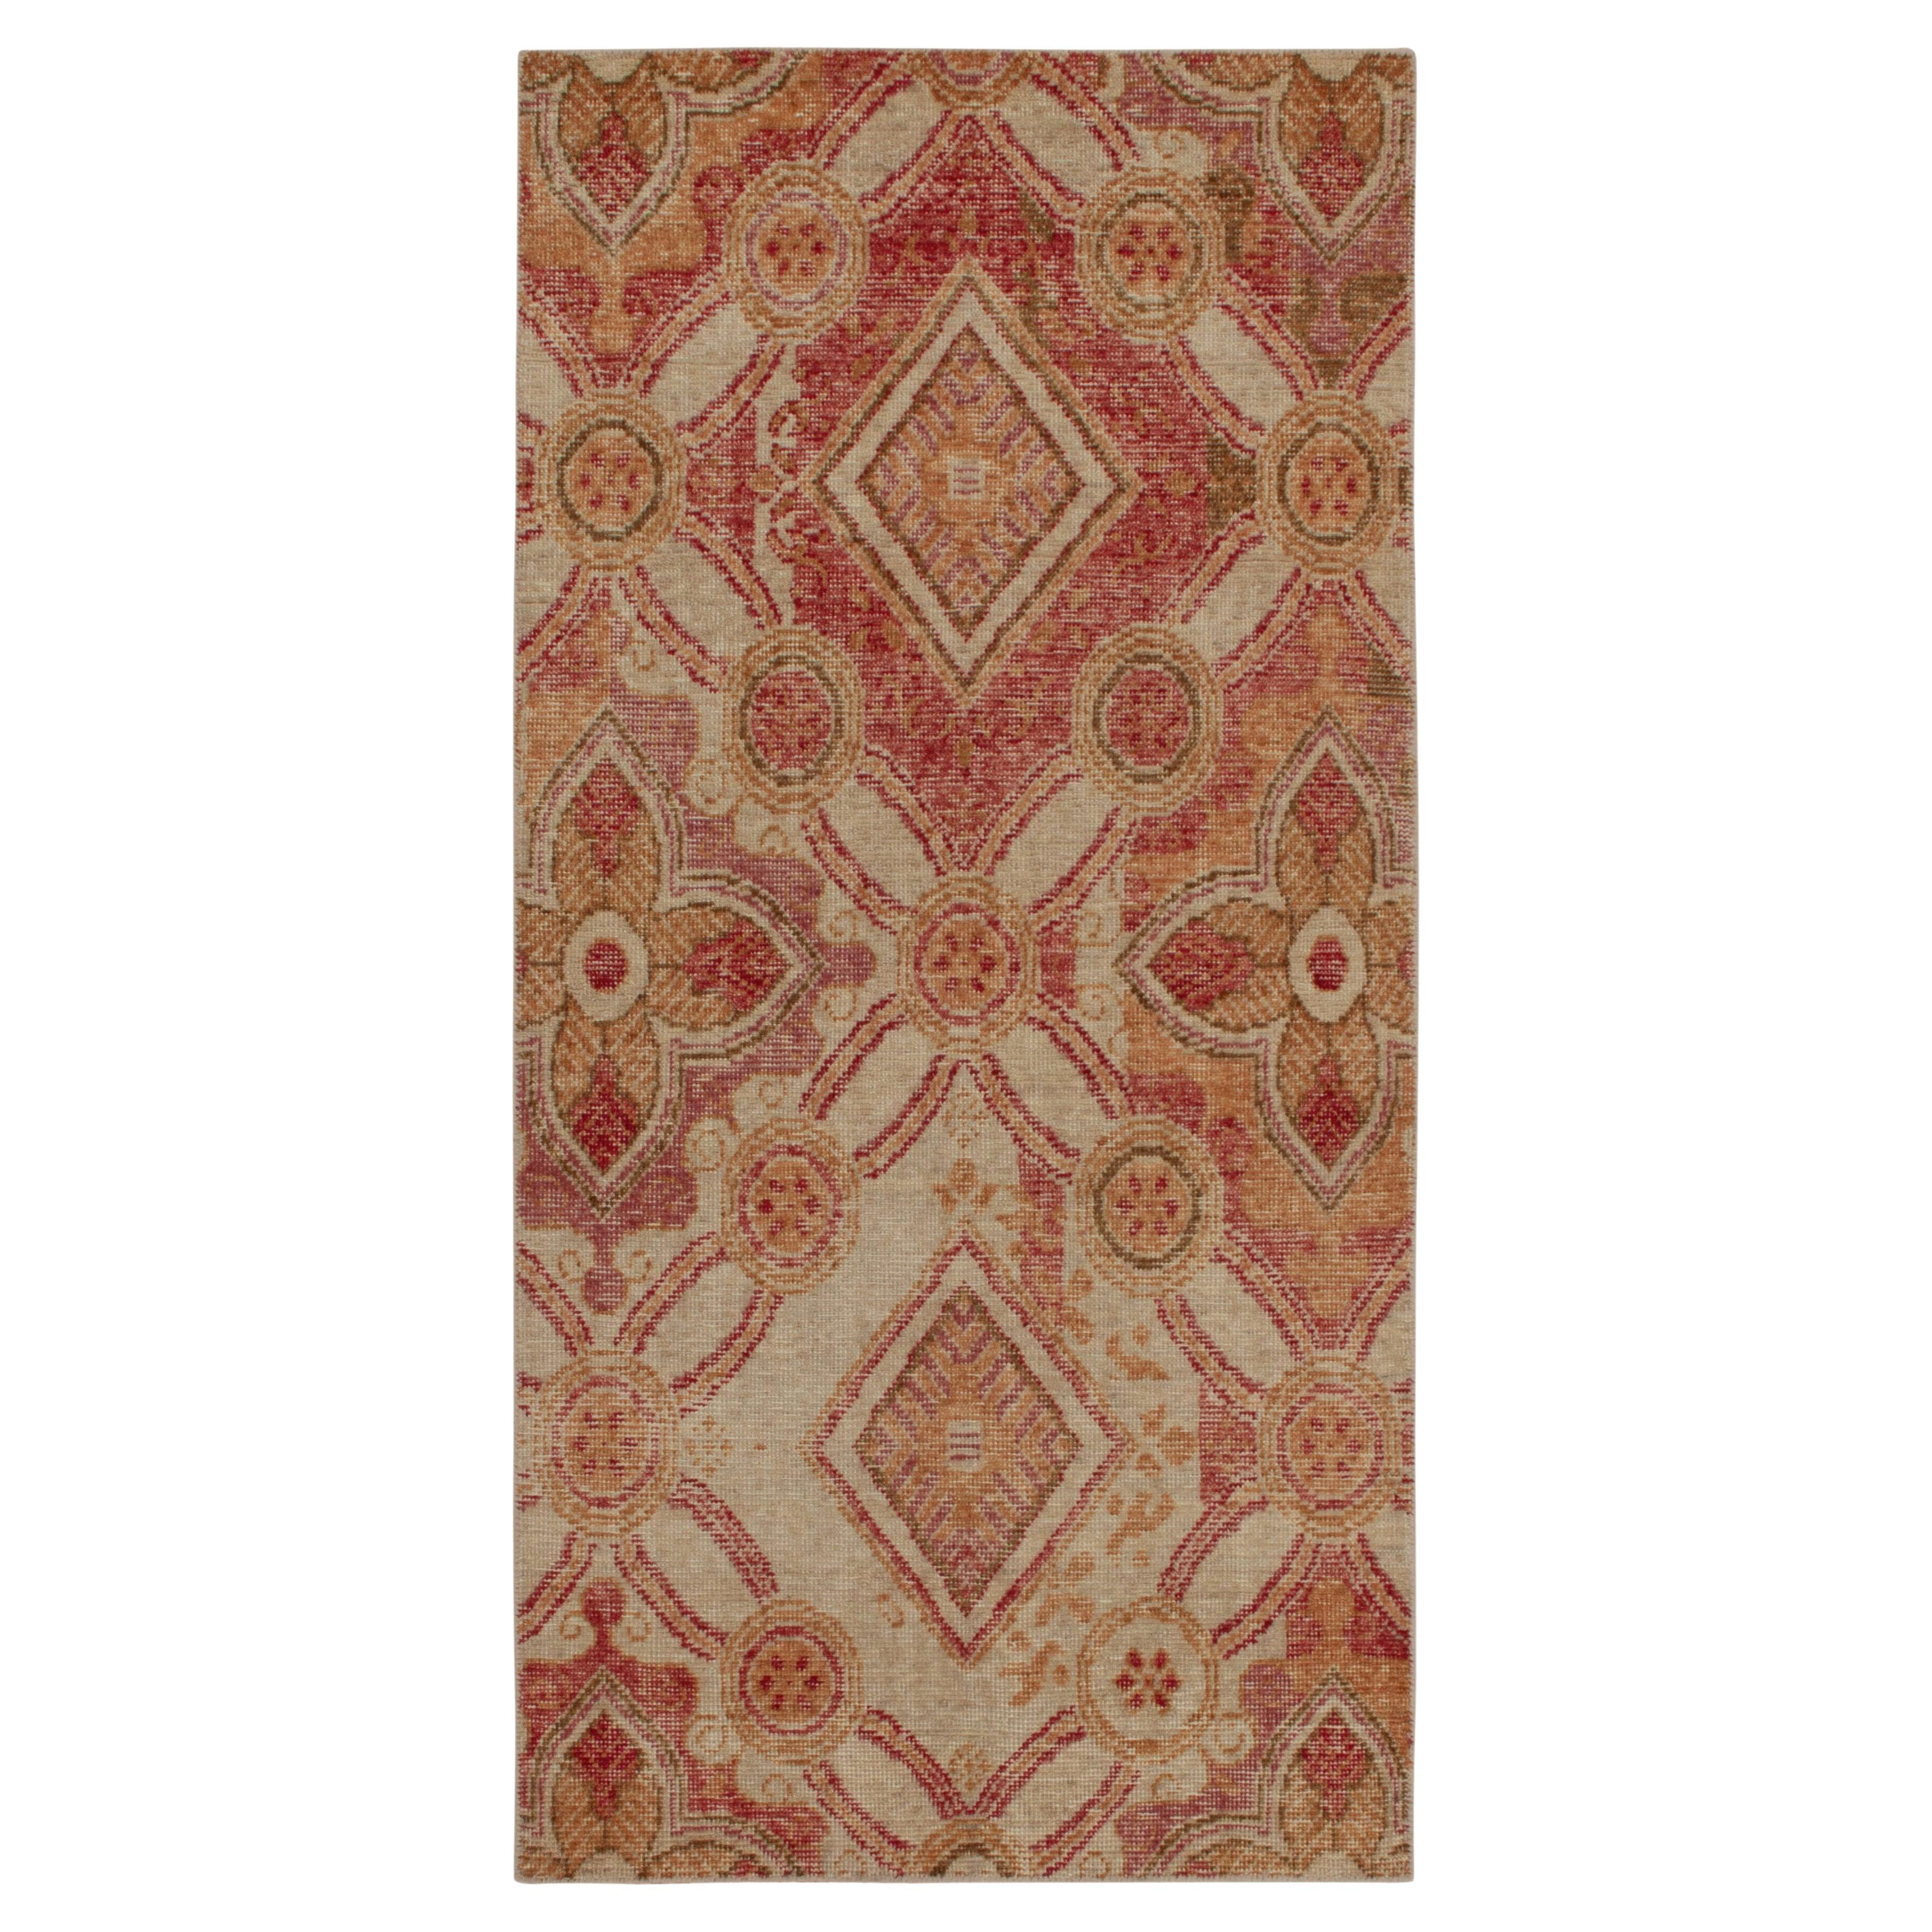 Rug & Kilim’s Distressed Style Runner in Red, Gold and Beige-Brown Trellises For Sale